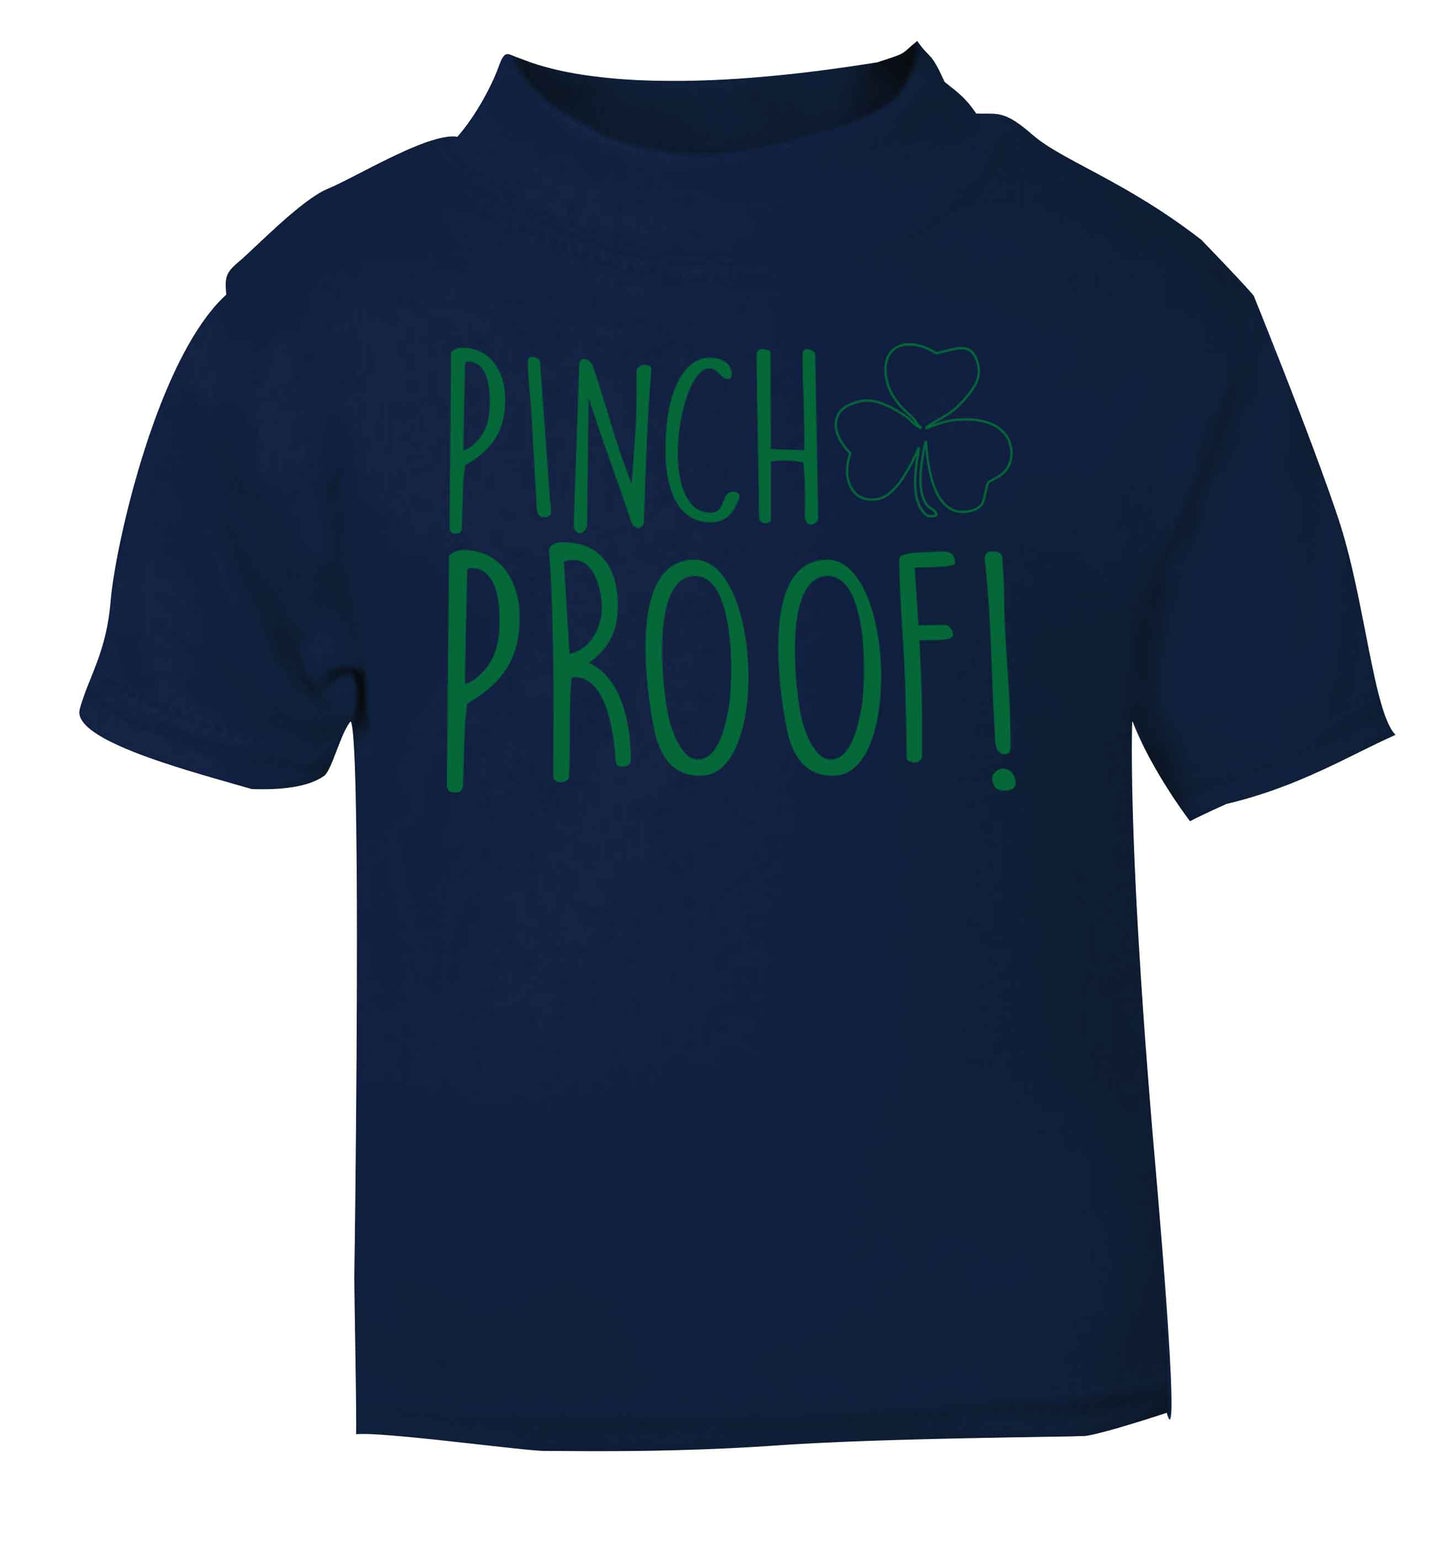 Pinch Proof navy baby toddler Tshirt 2 Years